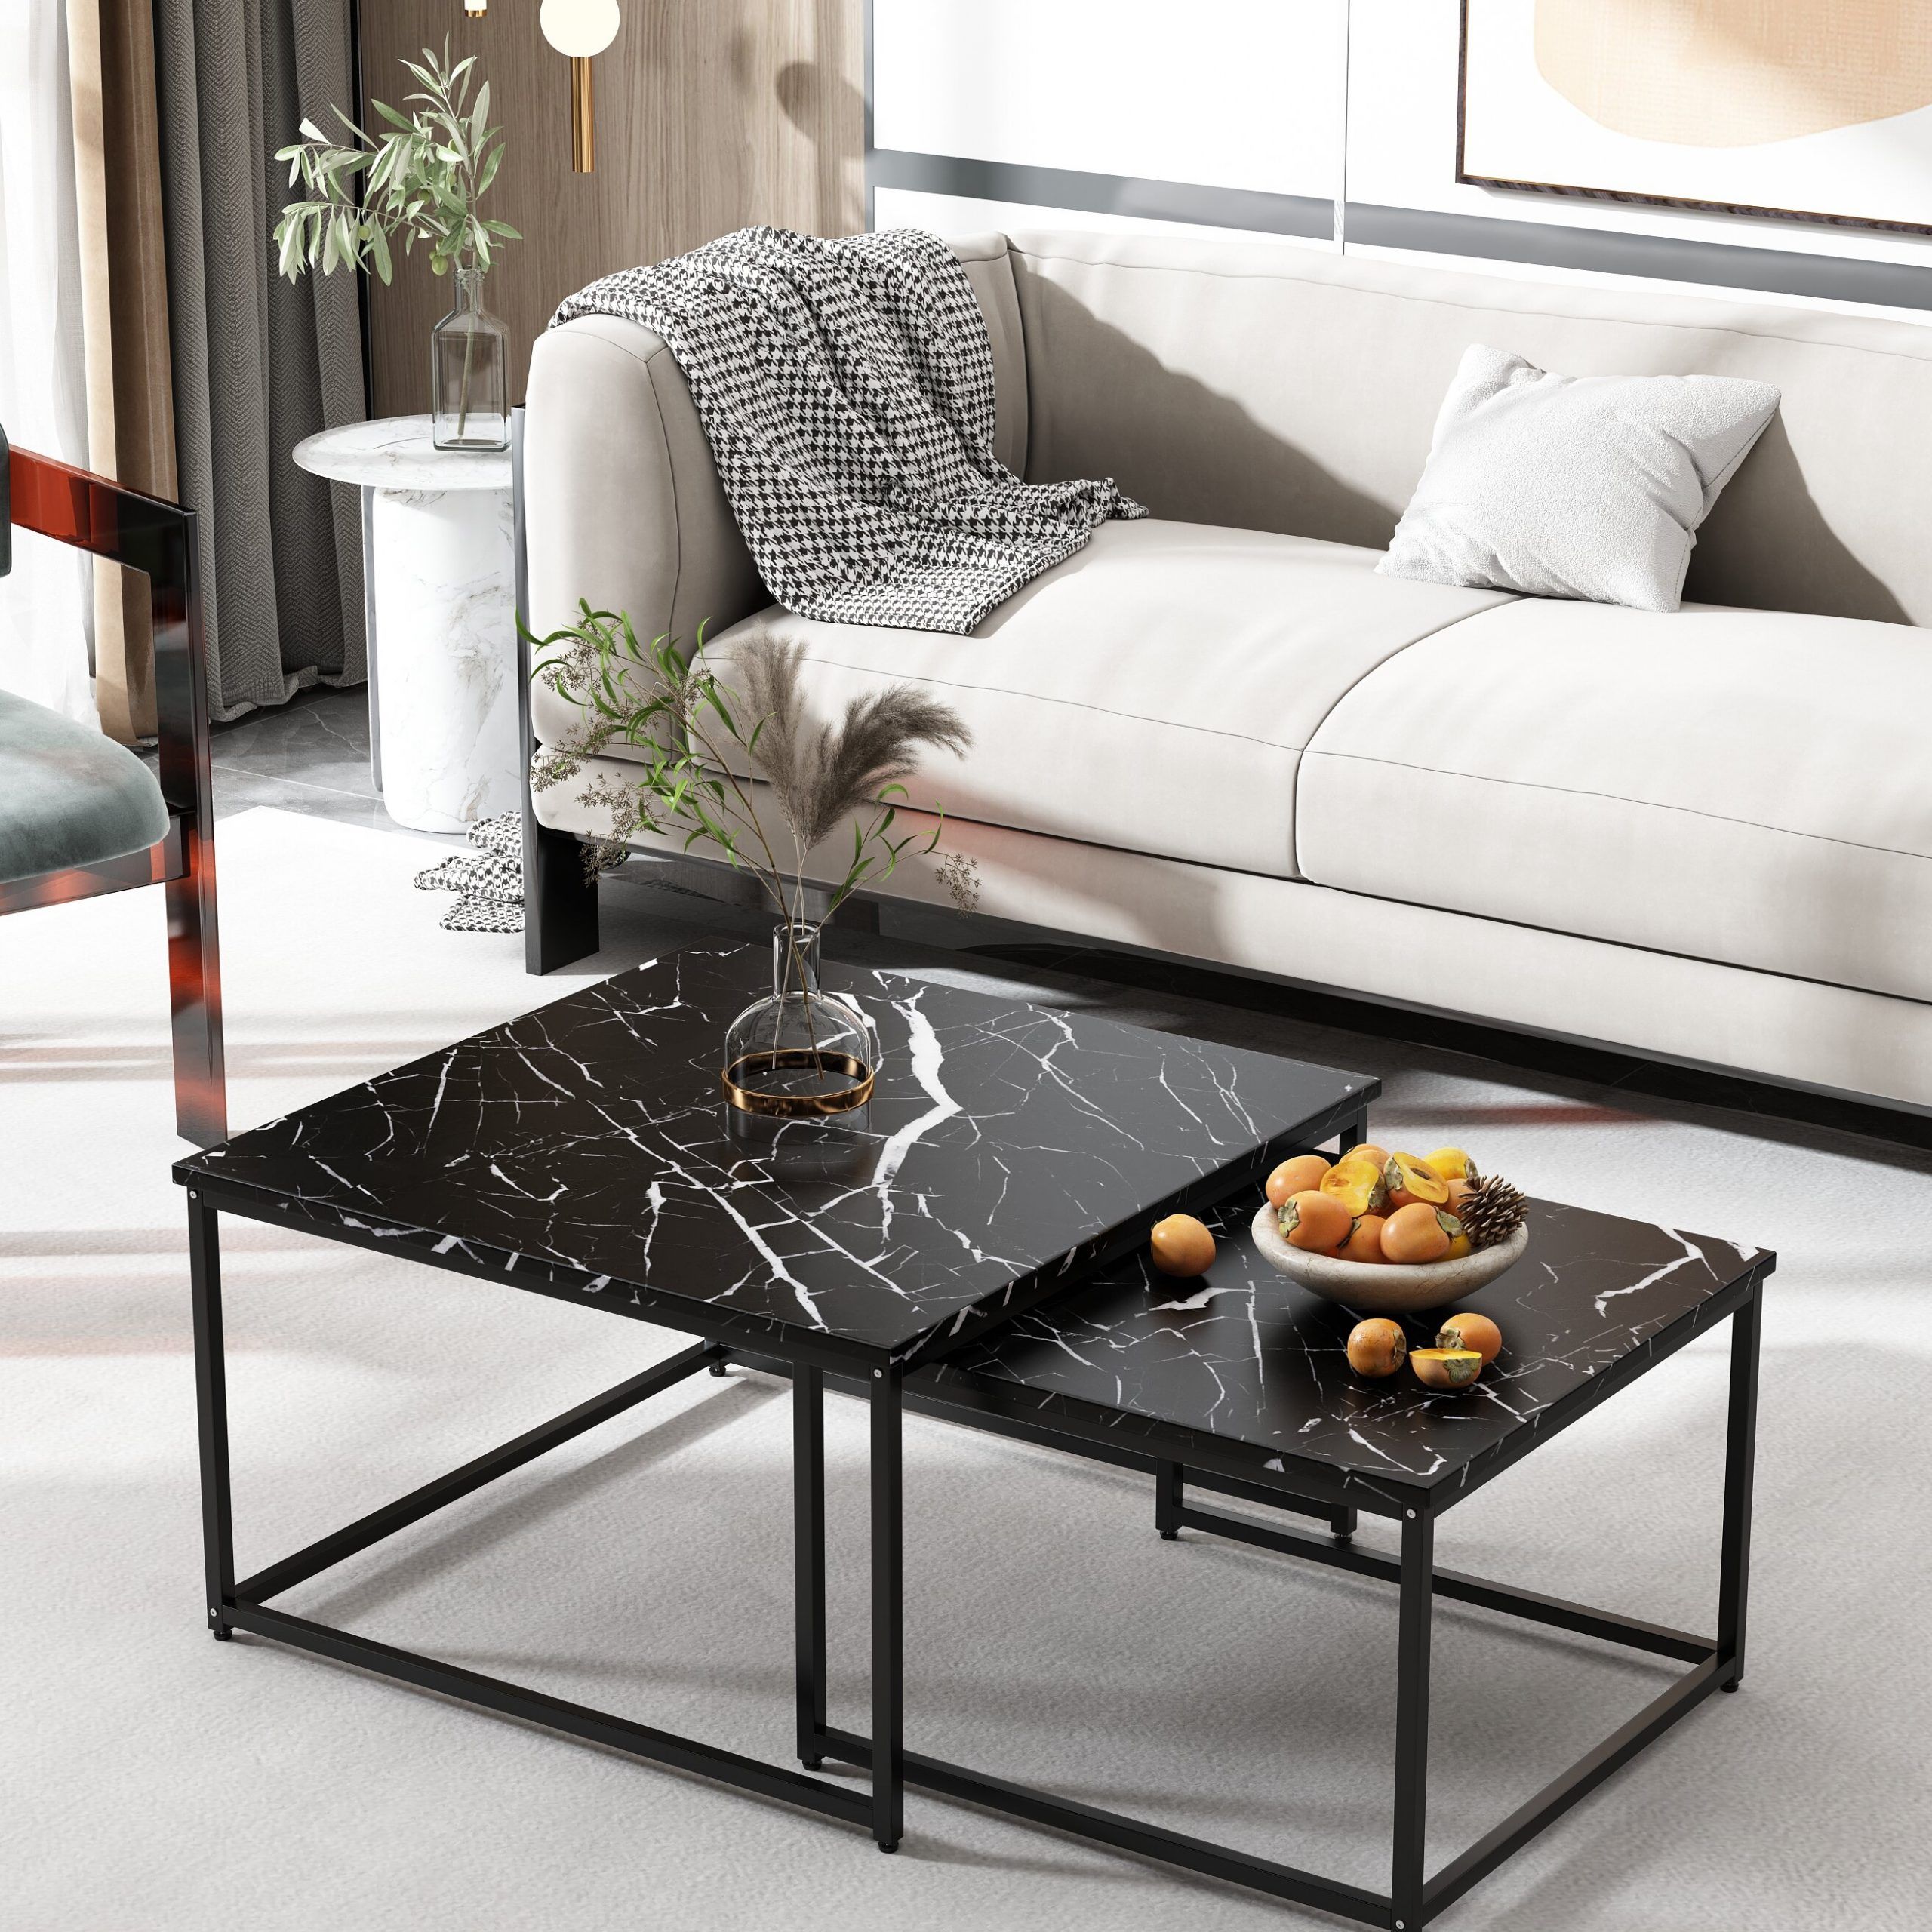 Latitude Run® Nesting Coffee Tables Set With Square Marble Top | Wayfair For Square Coffee Tables (View 7 of 20)